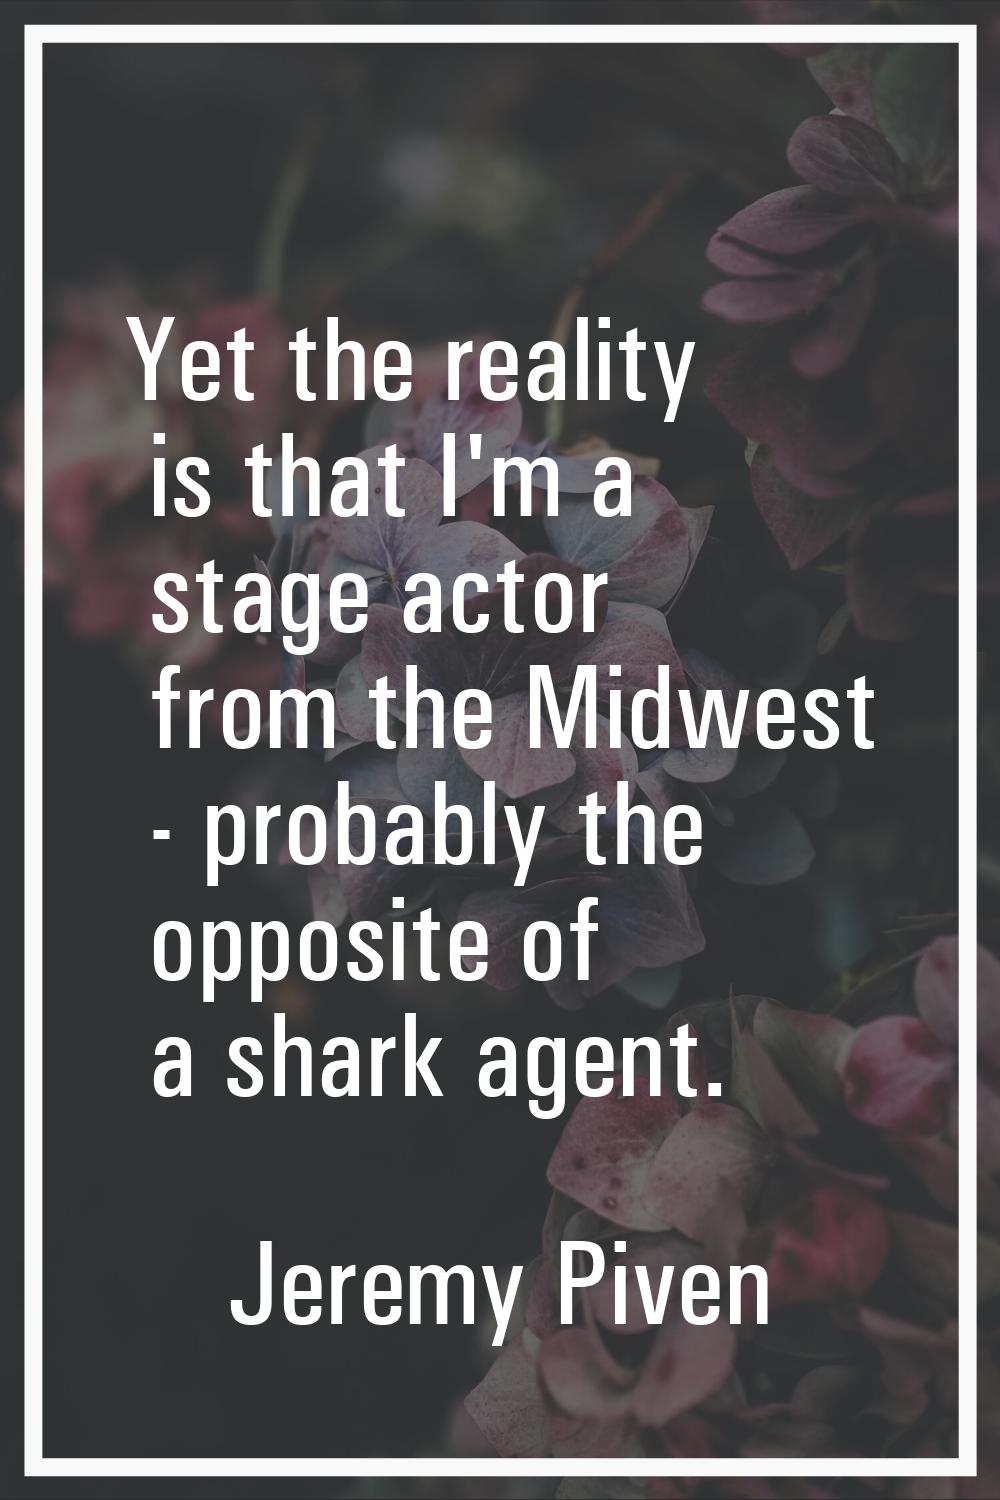 Yet the reality is that I'm a stage actor from the Midwest - probably the opposite of a shark agent